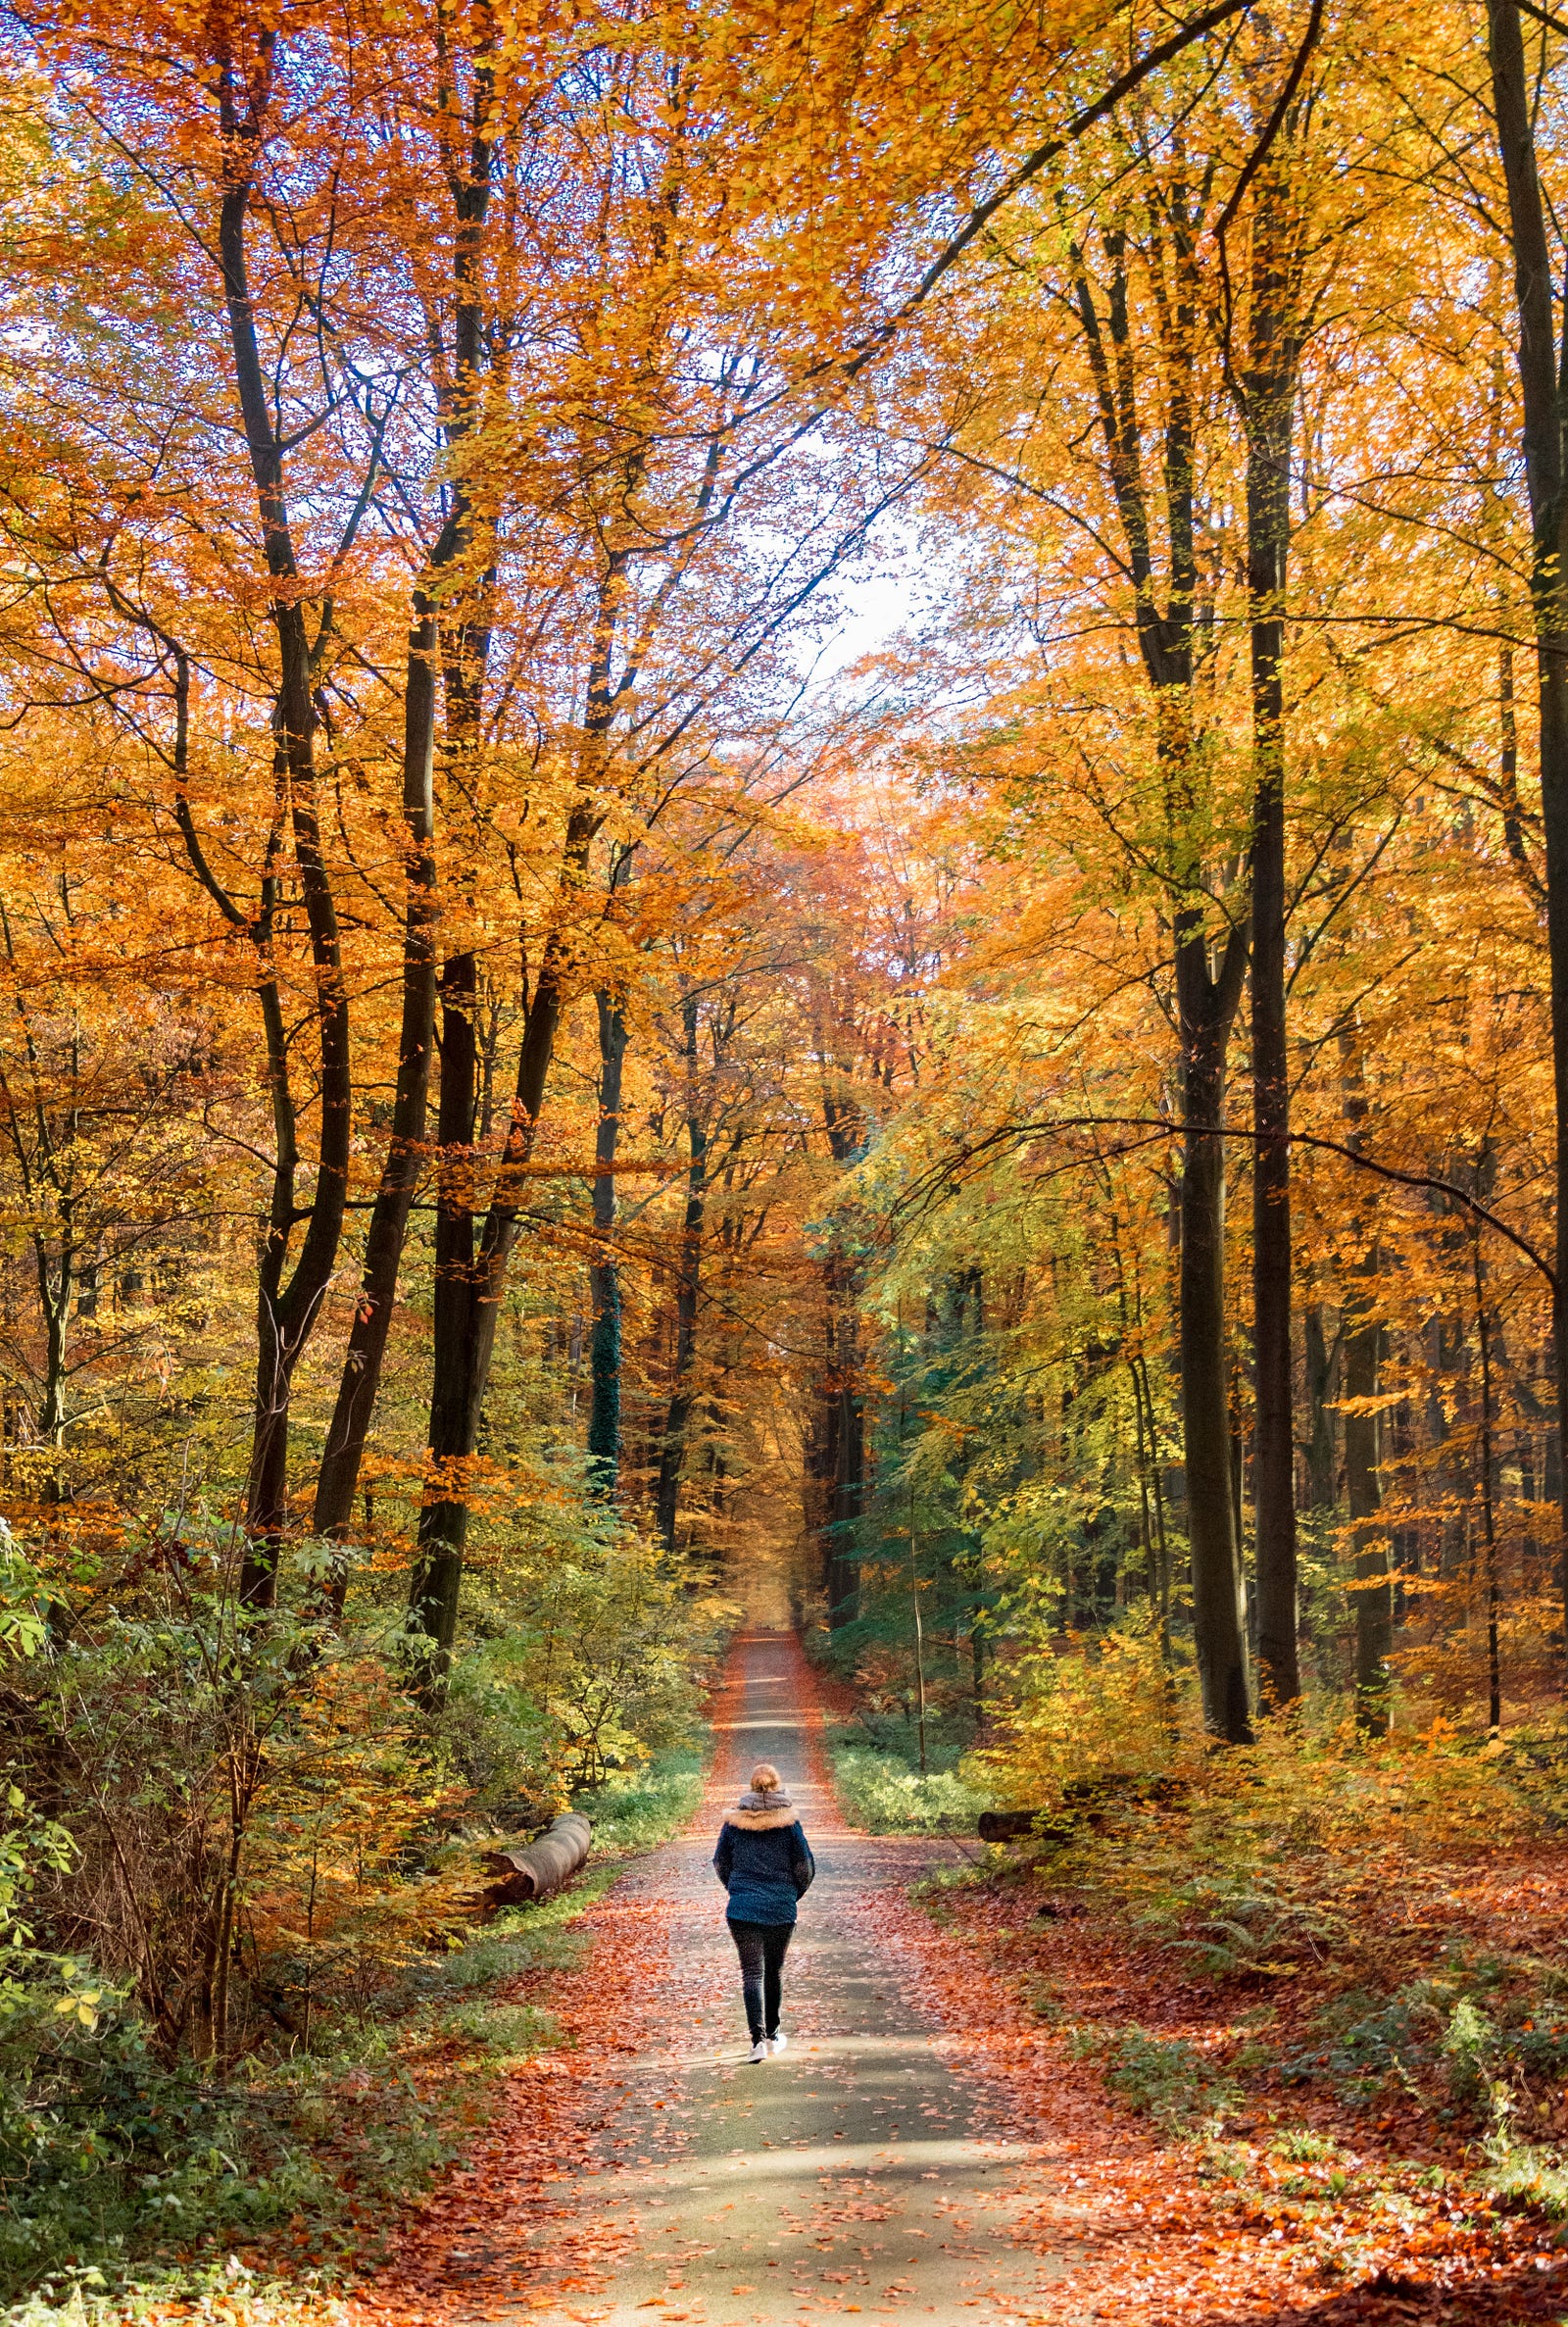 A person walks away from us in the woods. The autumn leaves are yellow and green. The American Cancer Society (ACS) notes that over 15 percent of all cancer deaths (aside from tobacco-related cancers) in the United States are related to lifestyle factors. These factors include physical inactivity, excess body weight, alcohol use, and poor nutrition.